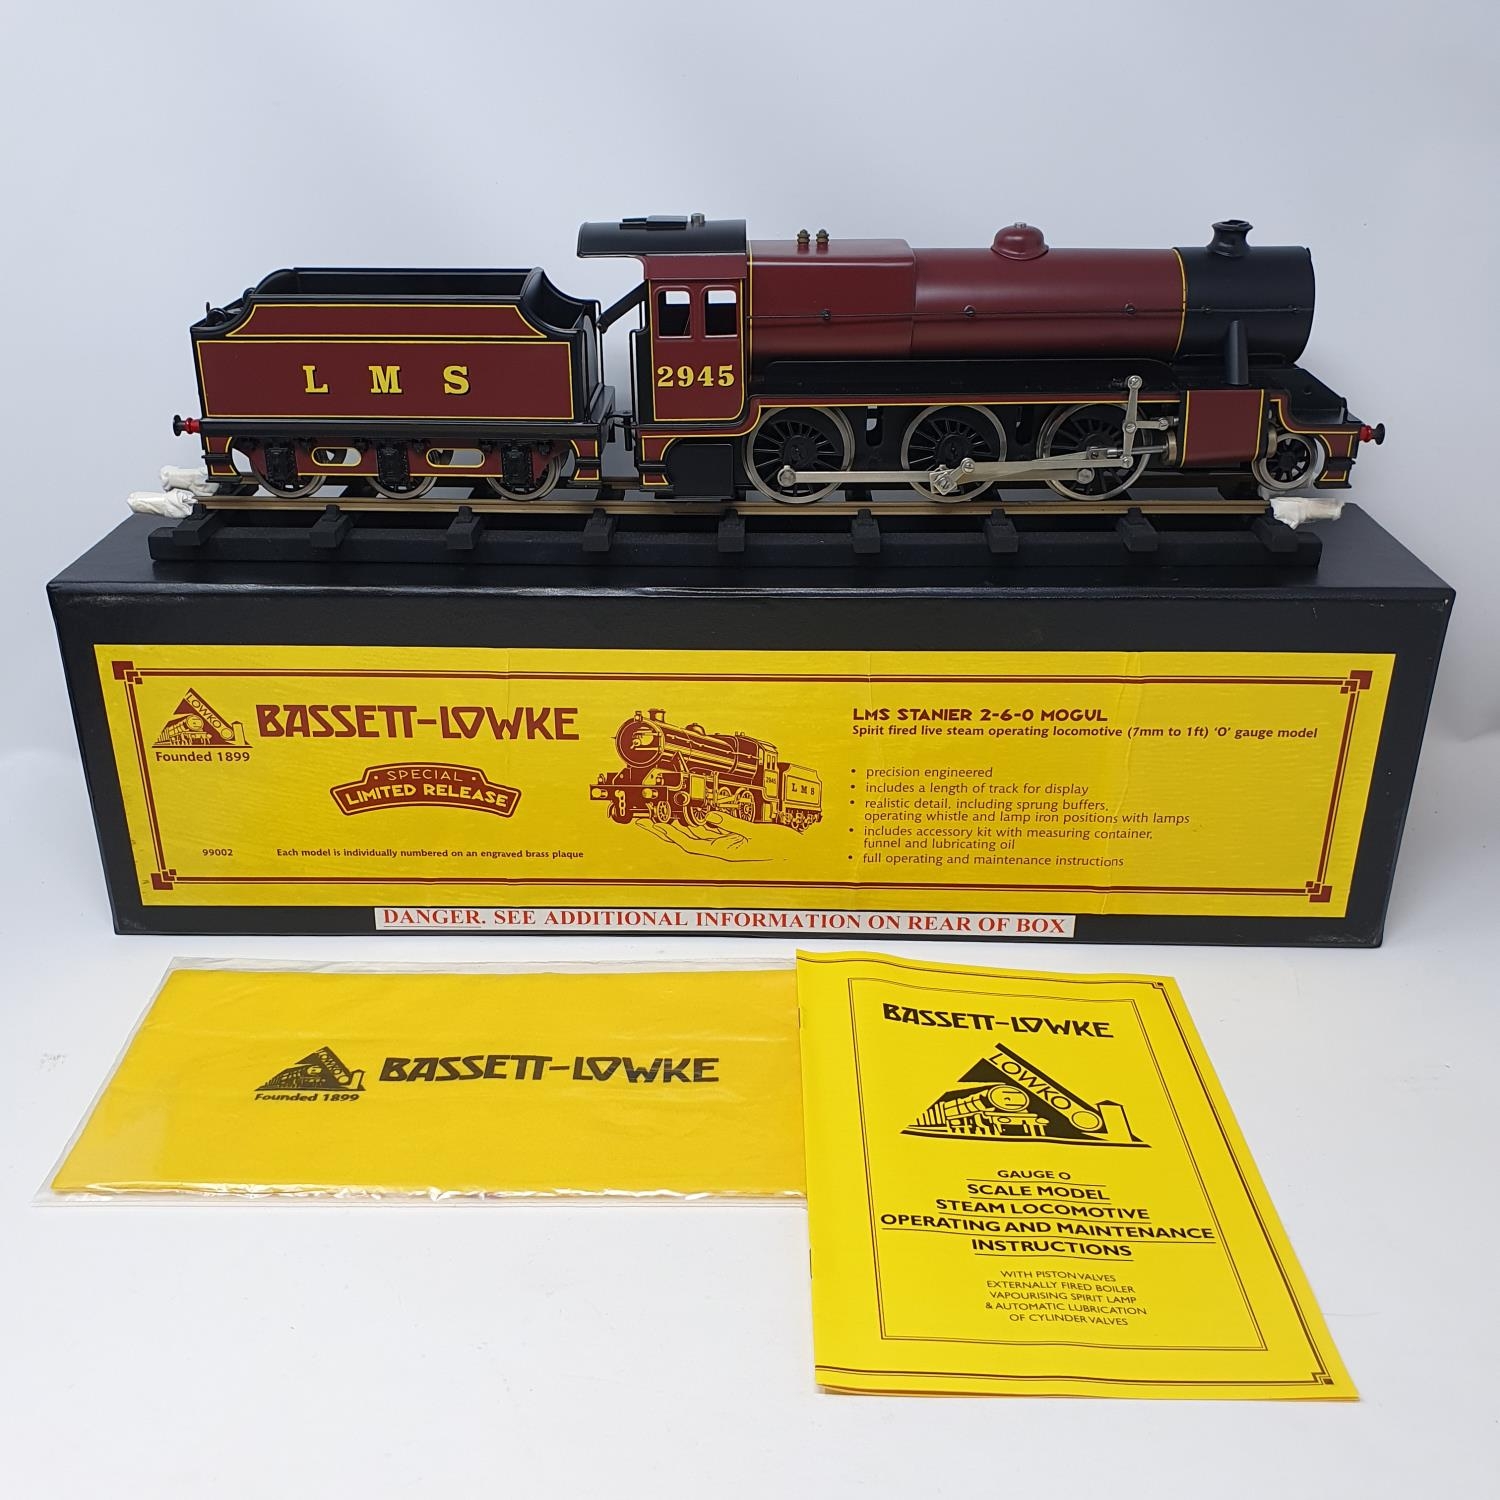 A Bassett-Lowke O gauge 2-6-0 locomotive and tender, in LMS livery, boxed - Image 2 of 3